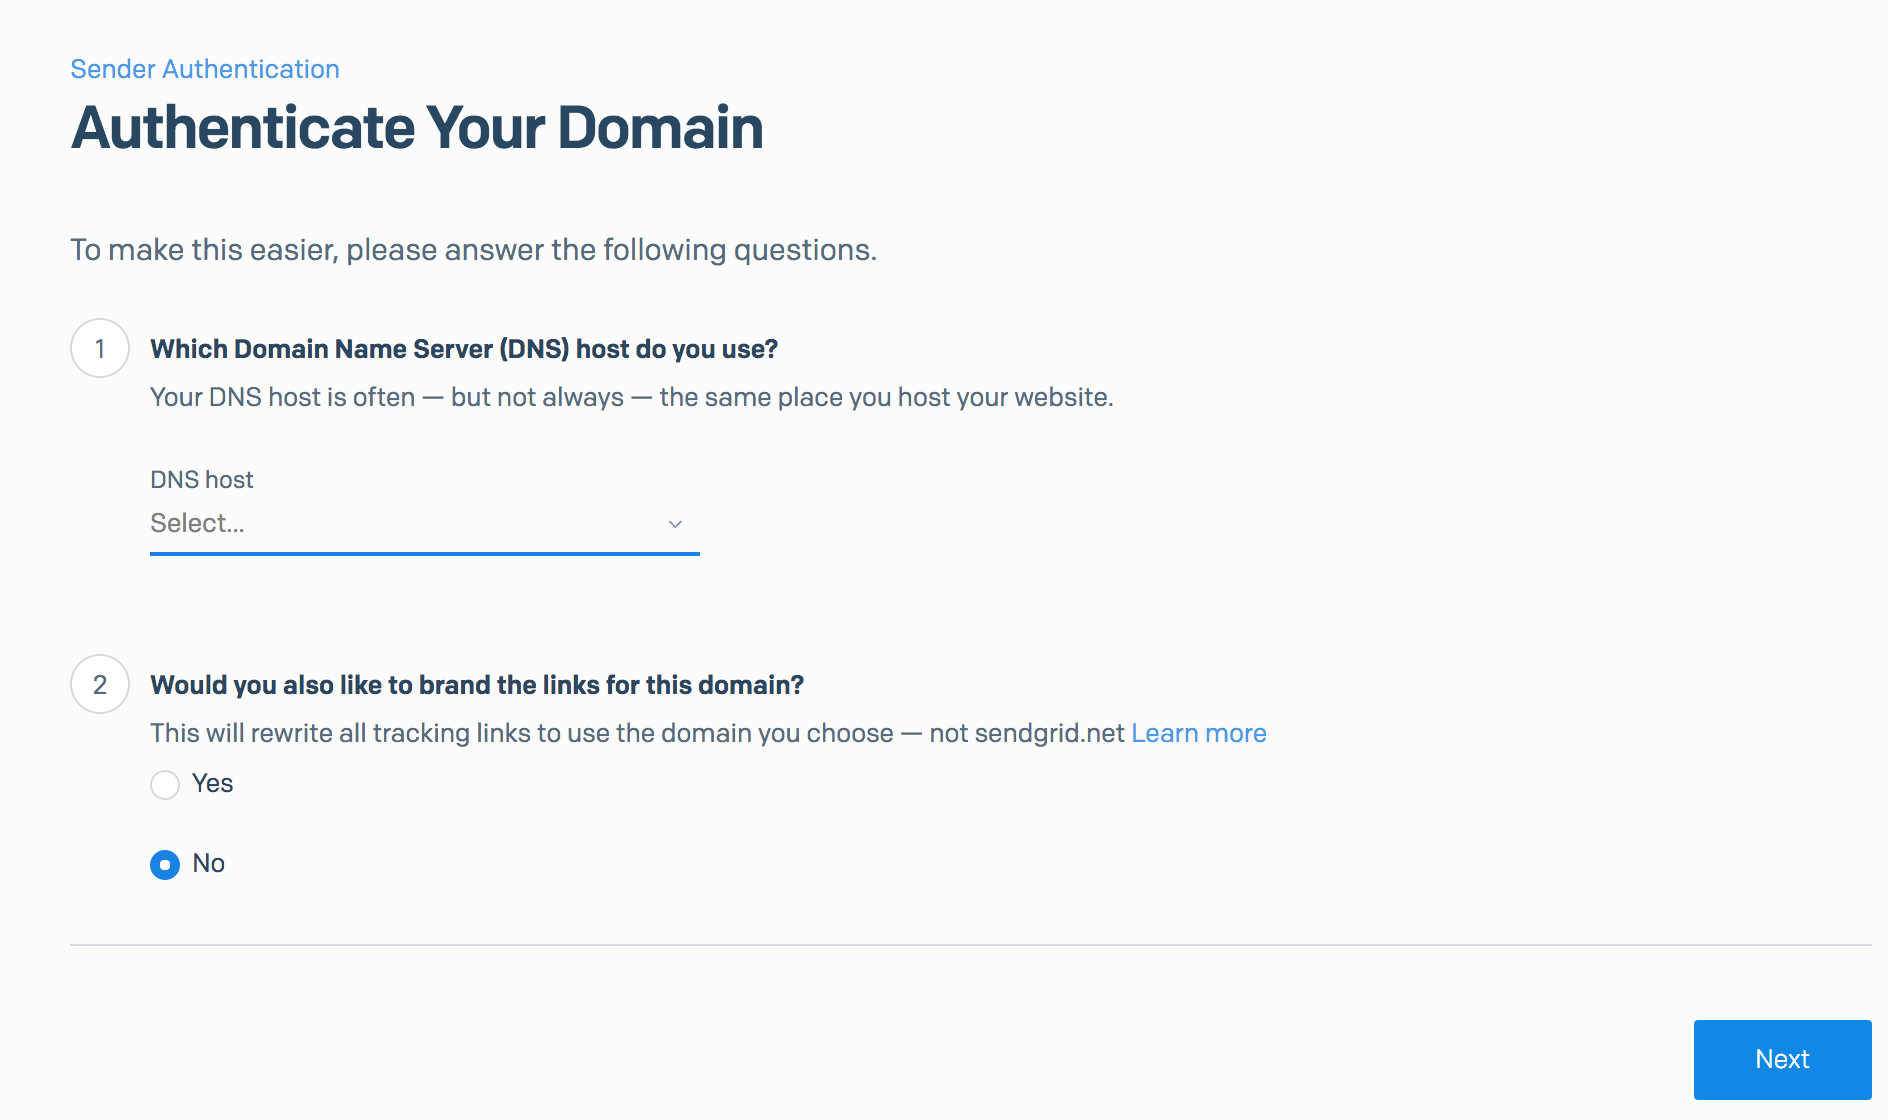 Authenticate email domain in SendGrid